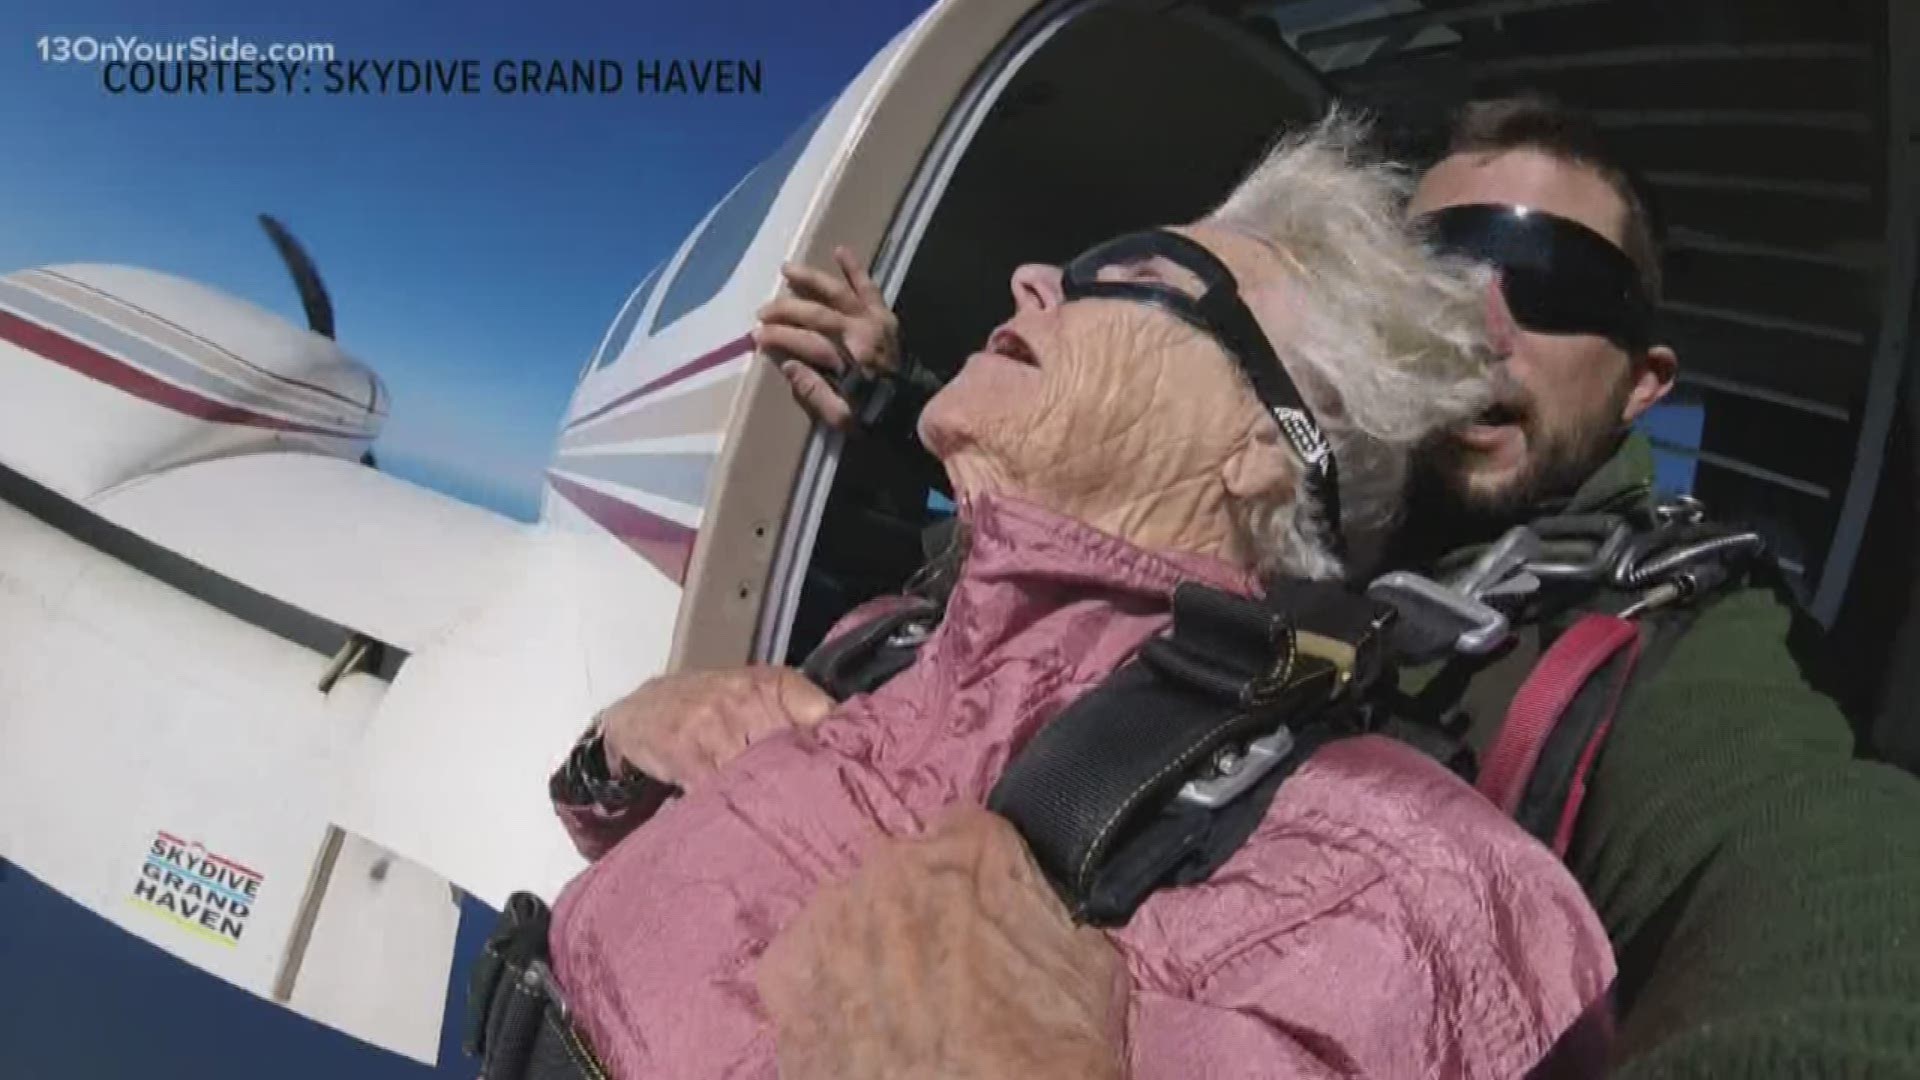 According to Haley Quinn, Skydive Grand Haven drop zone manager, Hartweg bested a record. The previous oldest jumper was a 93-year-old male.